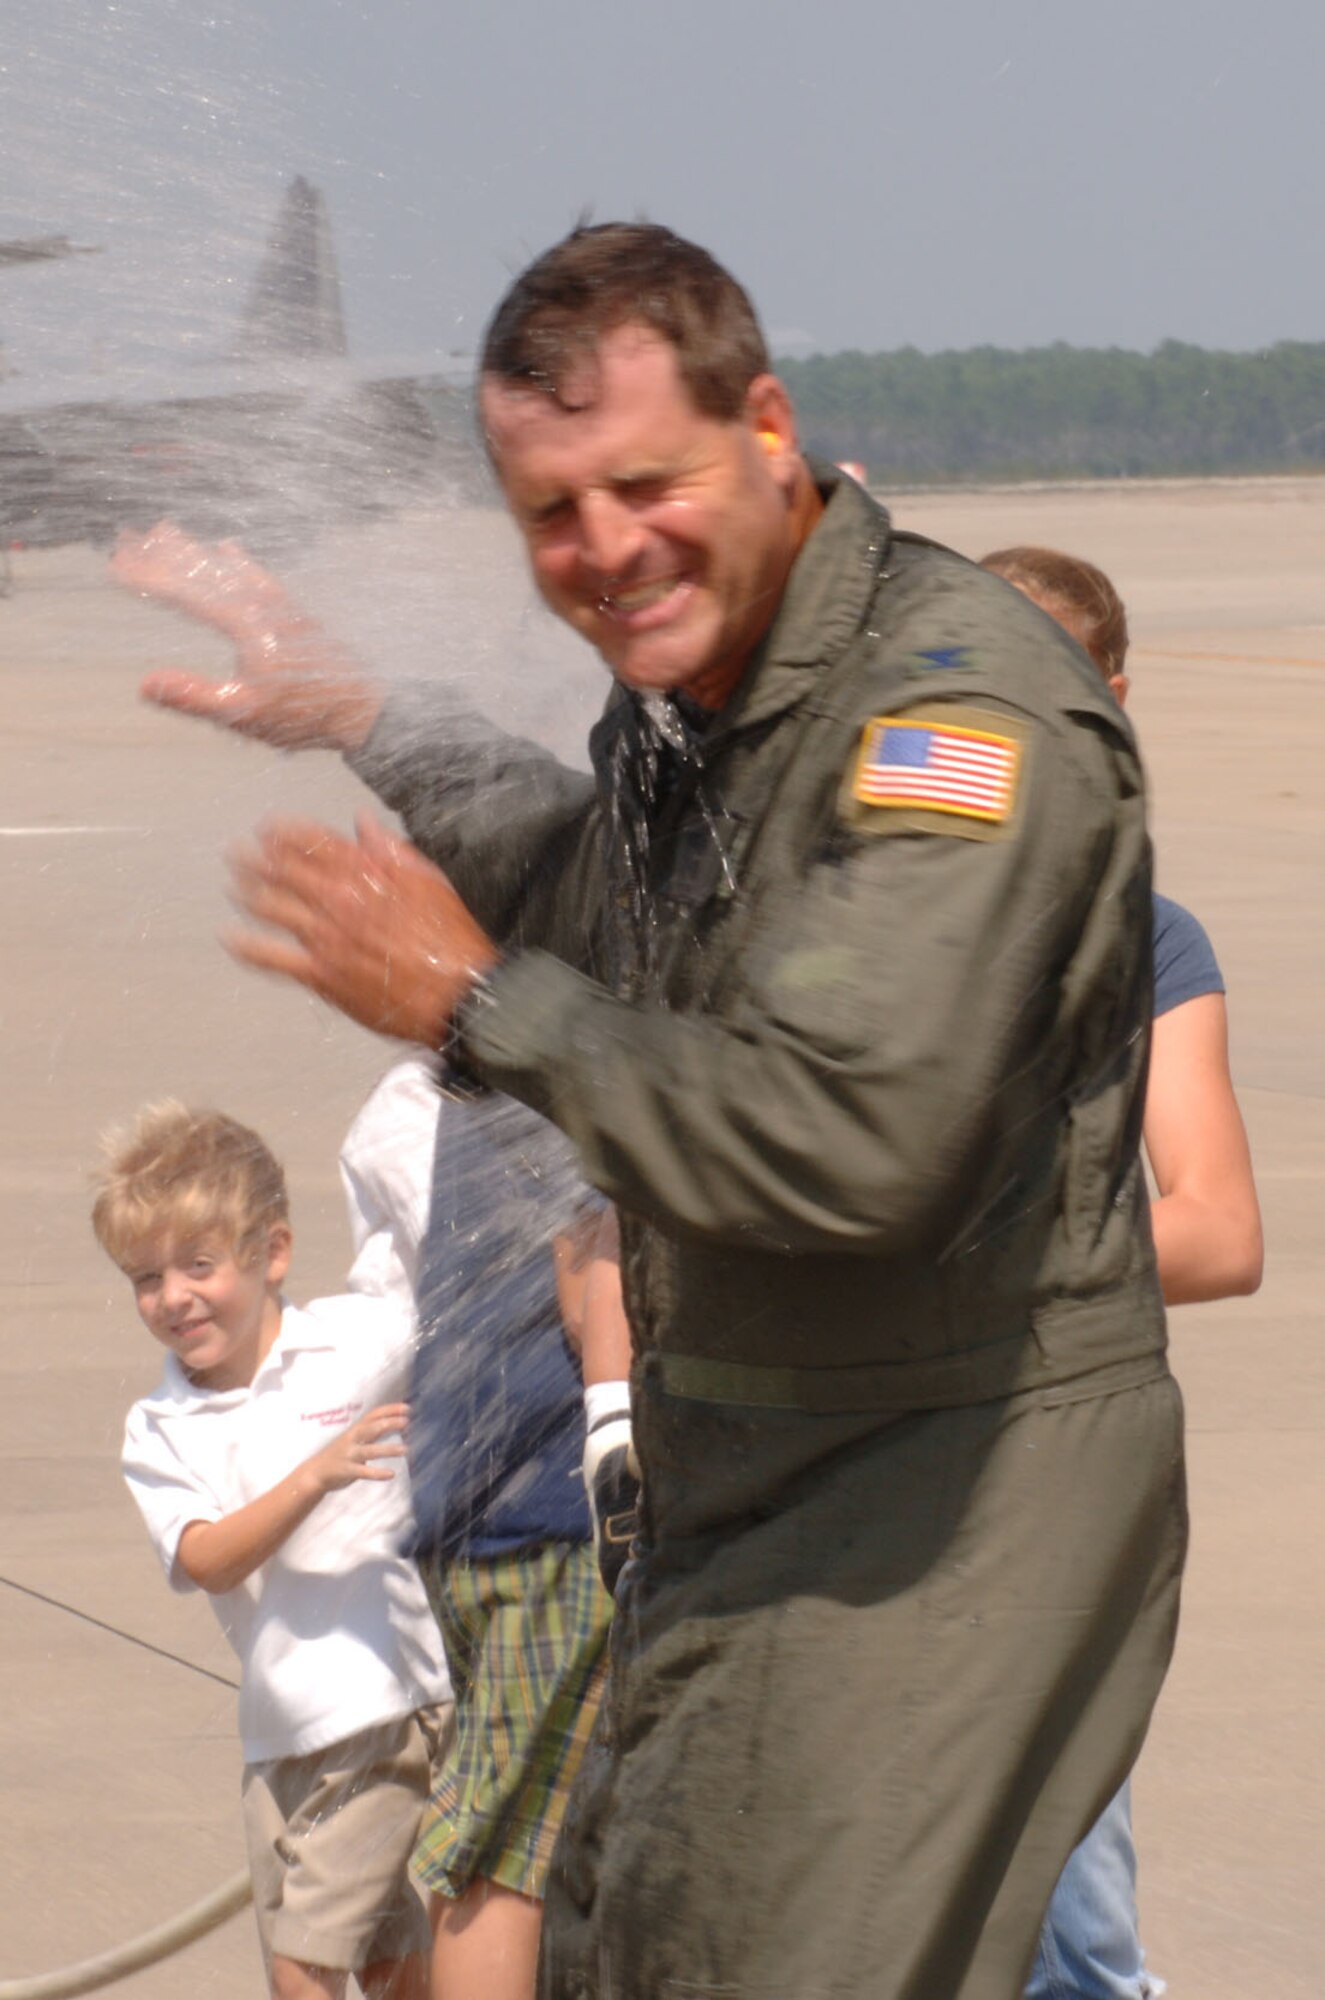 Col. Tim Minish, 16th Operations Group deputy commander, is sprayed after his final flight in a UH-1 Huey here Wednesday.  Colonel Minish will be retiring soon after 26 years of active-duty Air Force service. (U.S. Air Force Photograph by Senior Airman Andy Kin)